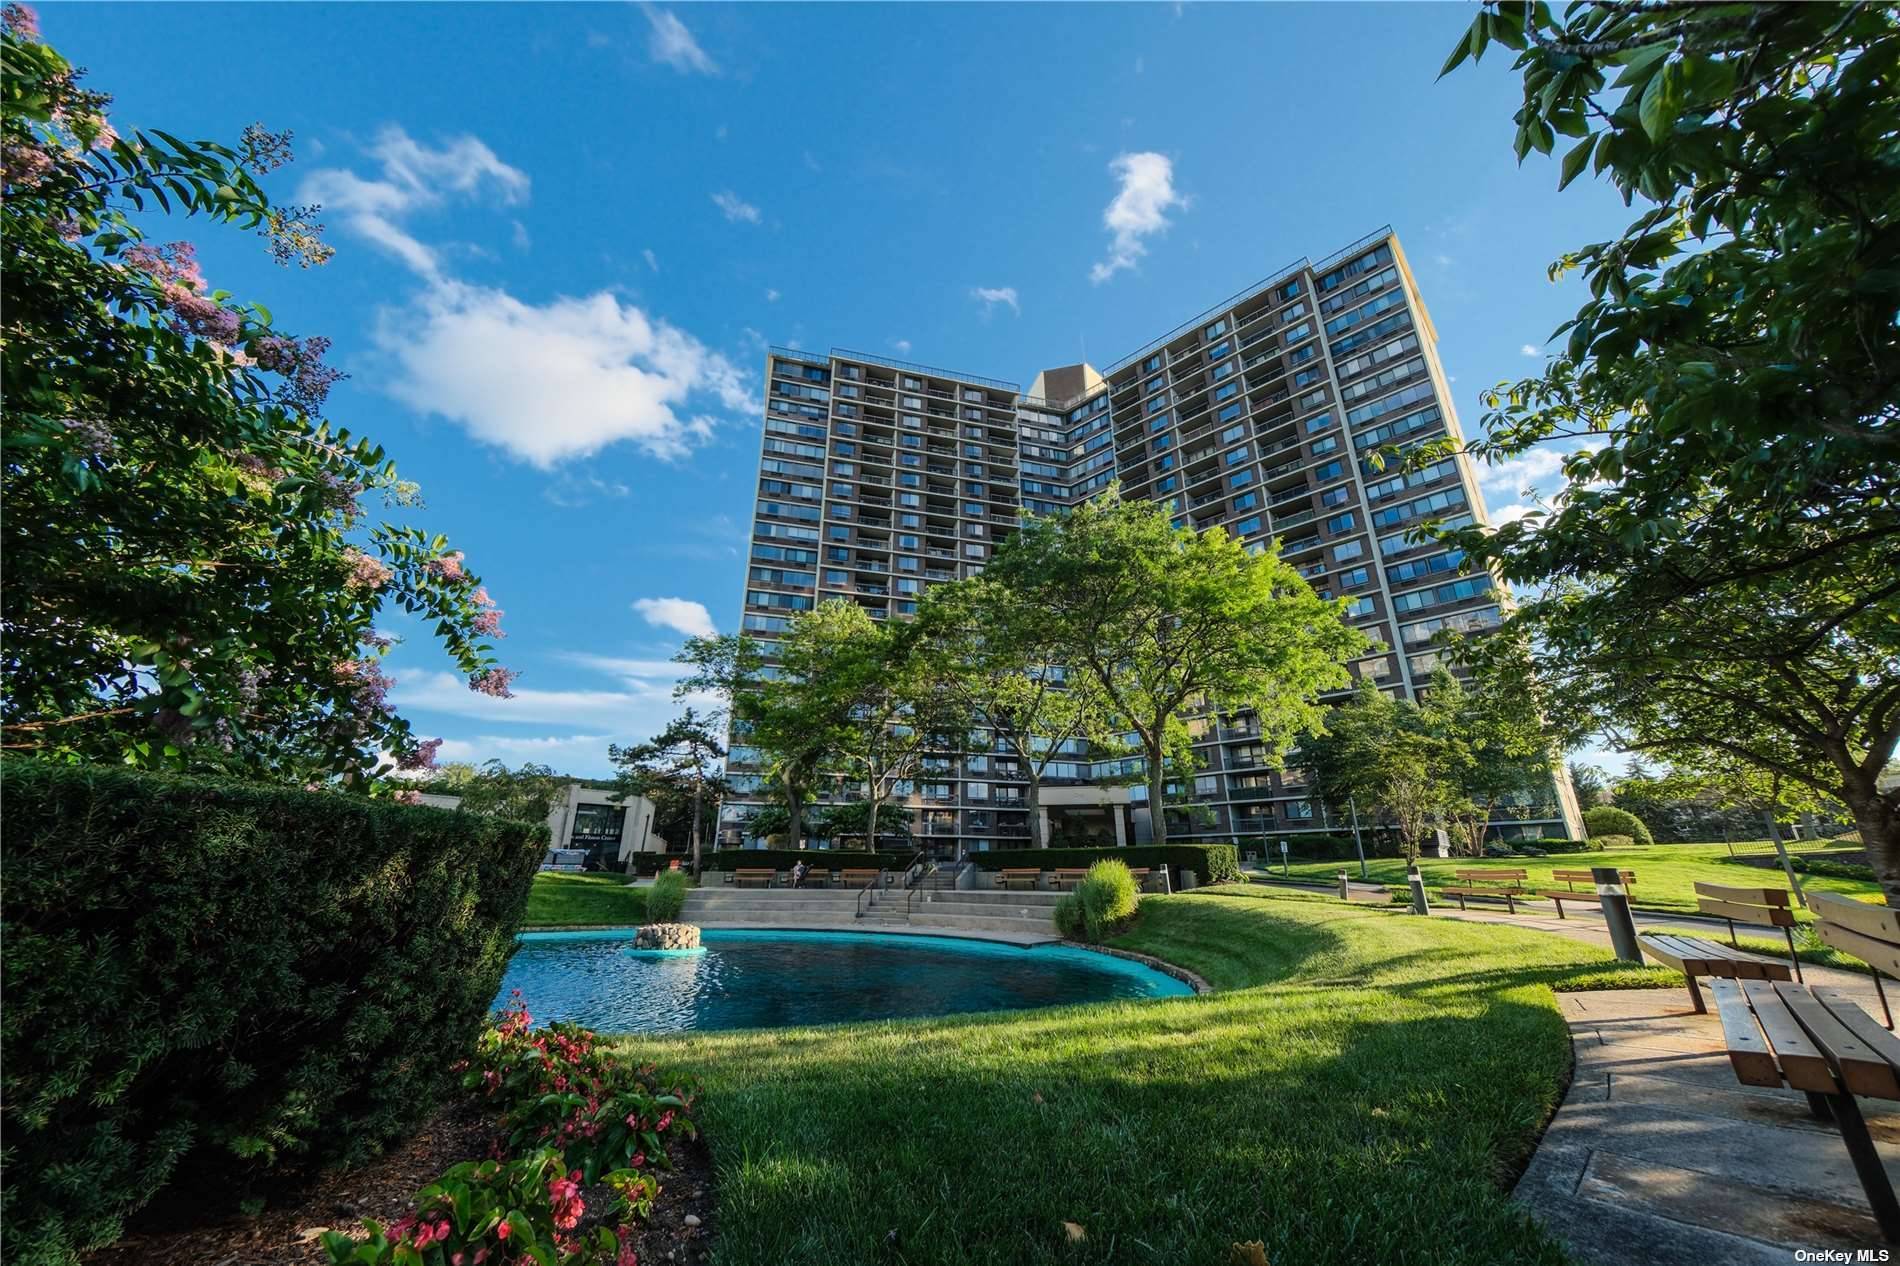 Rare 2 bedroom, 1. 5 bath condo with amazing water and bridge views in the exclusive gated community of The Bay Club.